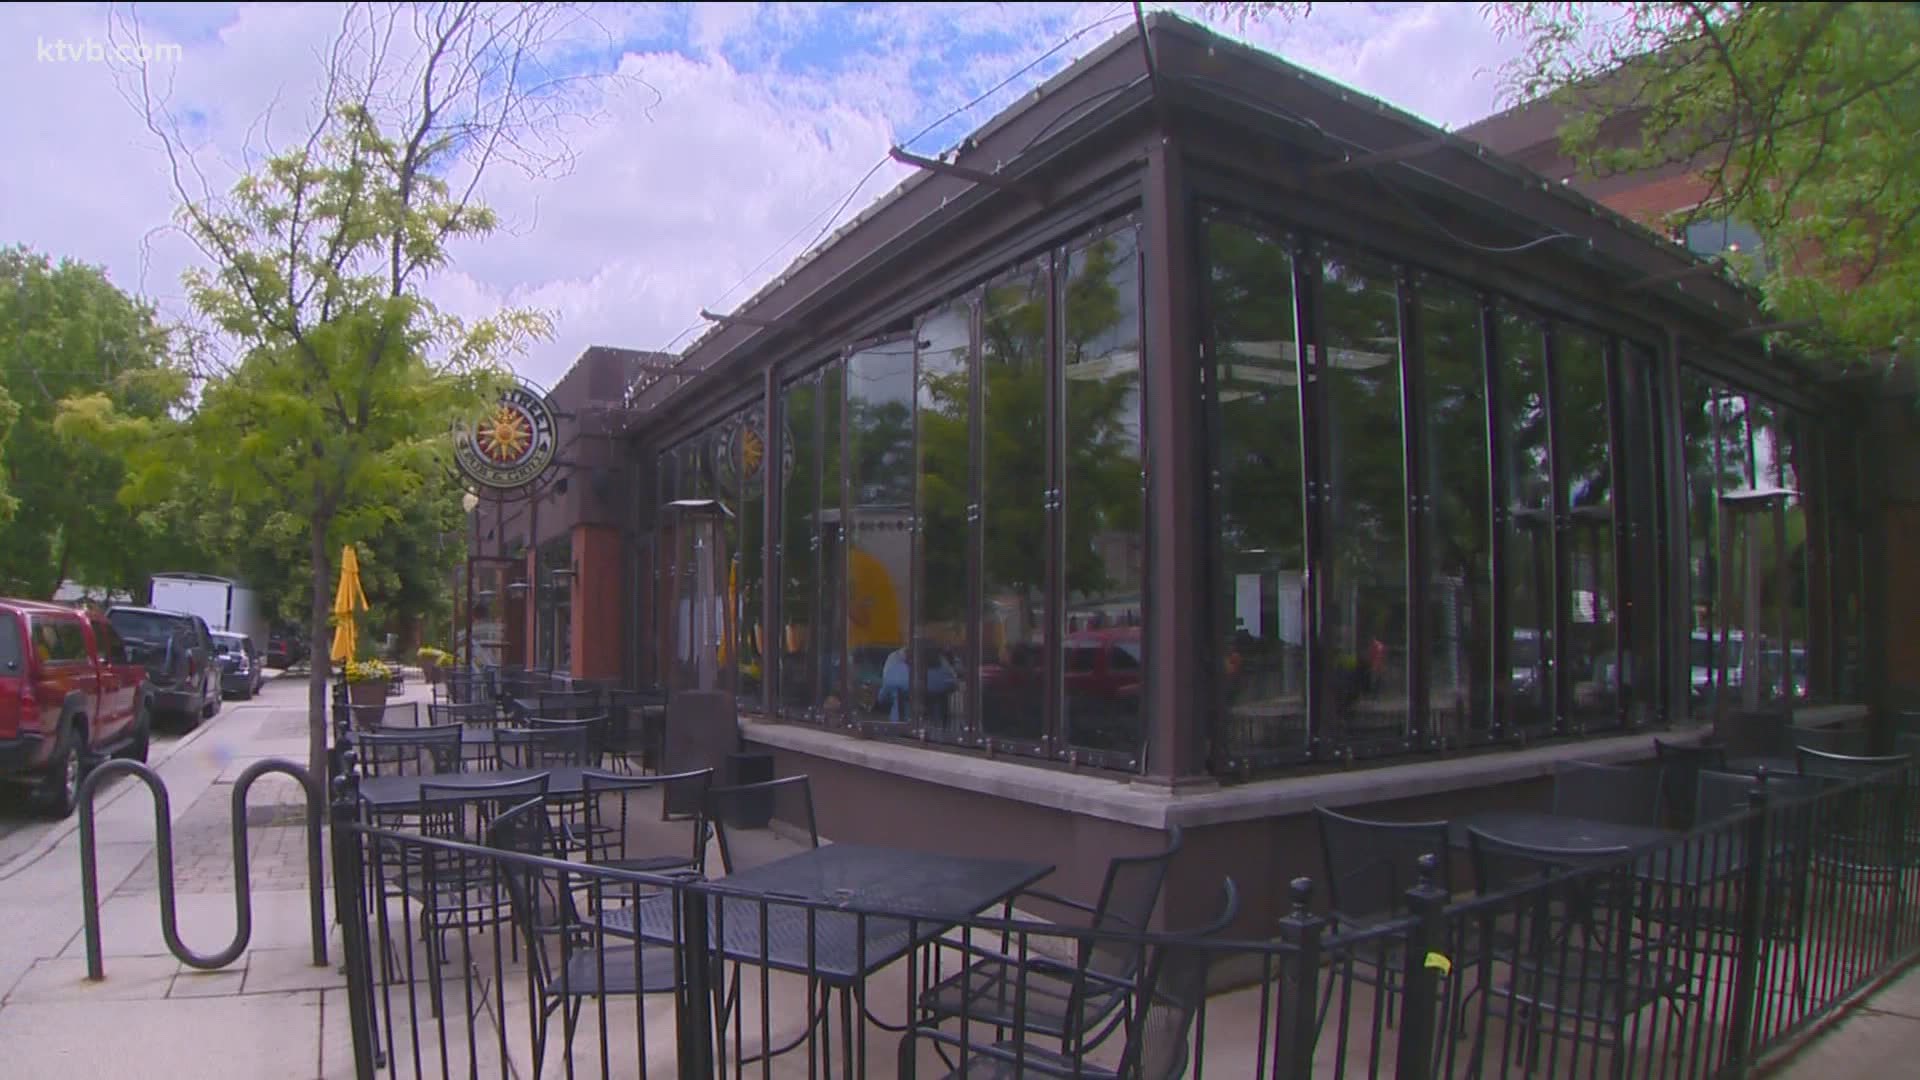 The resolution would allow restaurant owners to expand their patios to allow for increased social distancing.